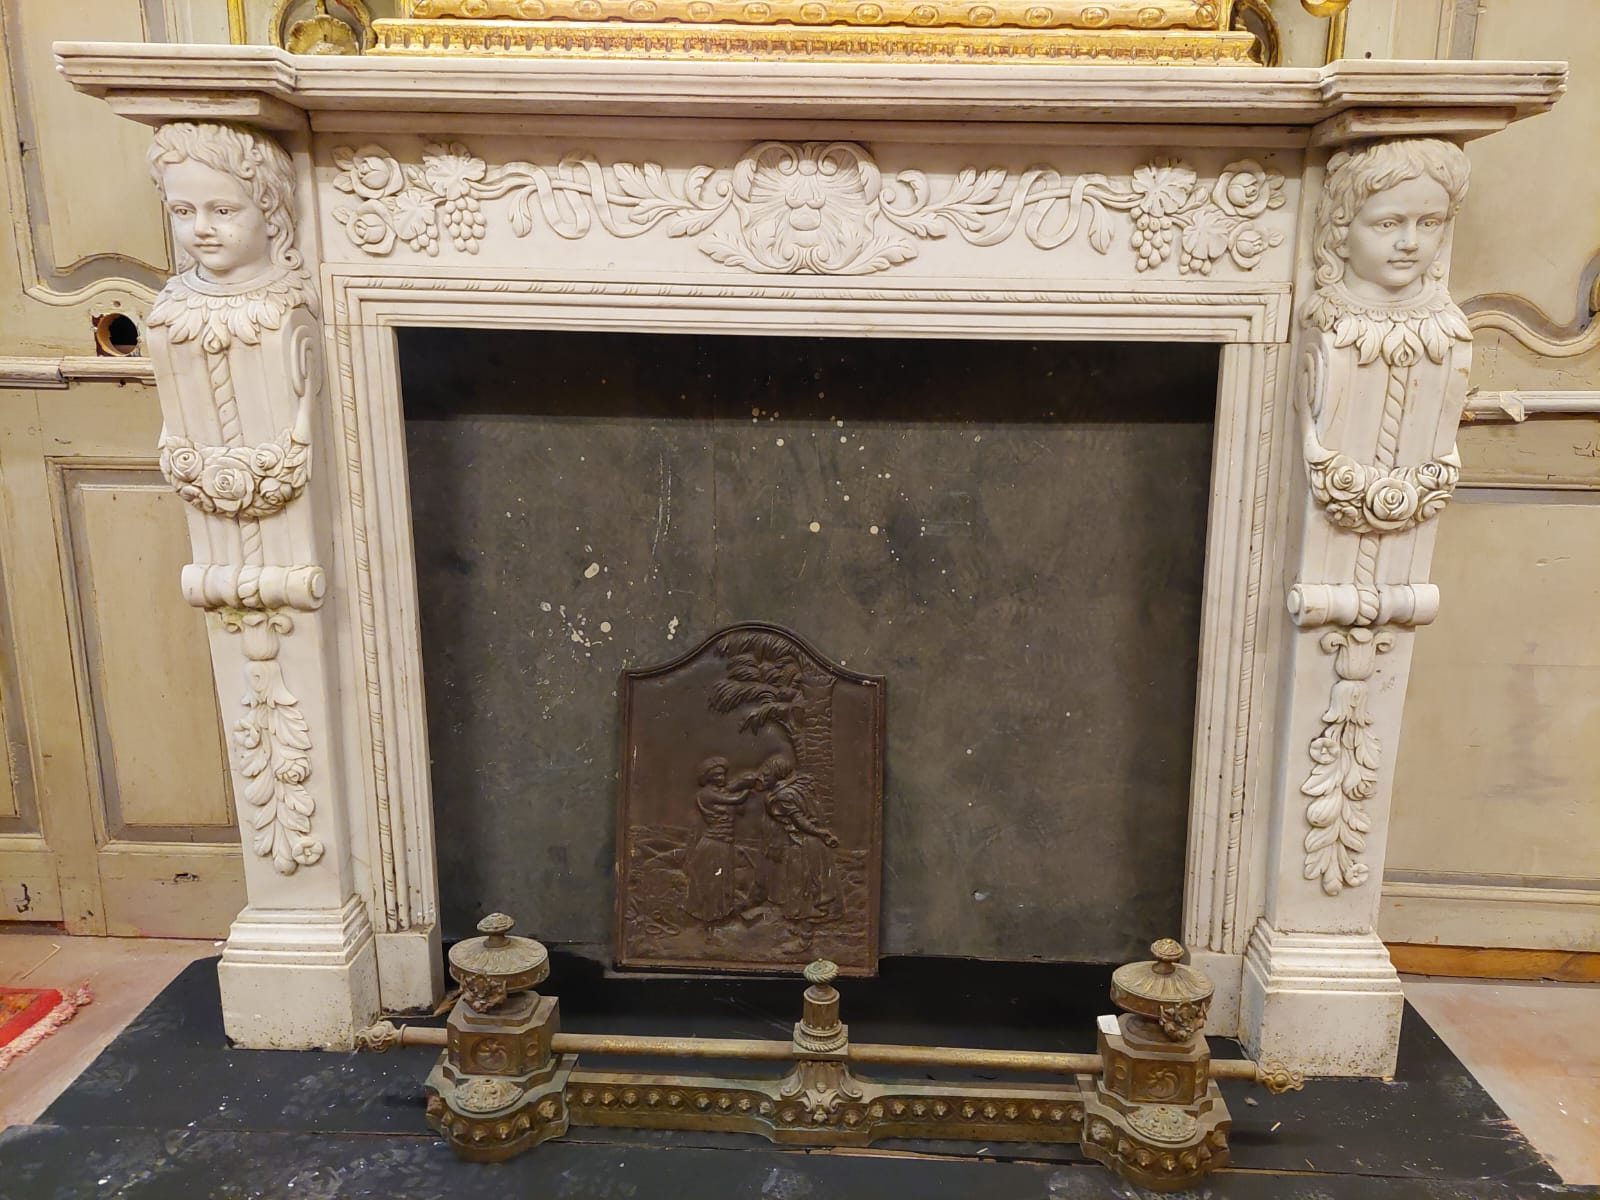 Ancient fireplace, in precious white Carrara marble, built in the 19th century, richly carved with Caryatids and floral motifs, from Piedmont (Italy), measuring cm W 160 x H 120 x T 29, the internal opening measures cm W 101 x H 92.
Very rich and